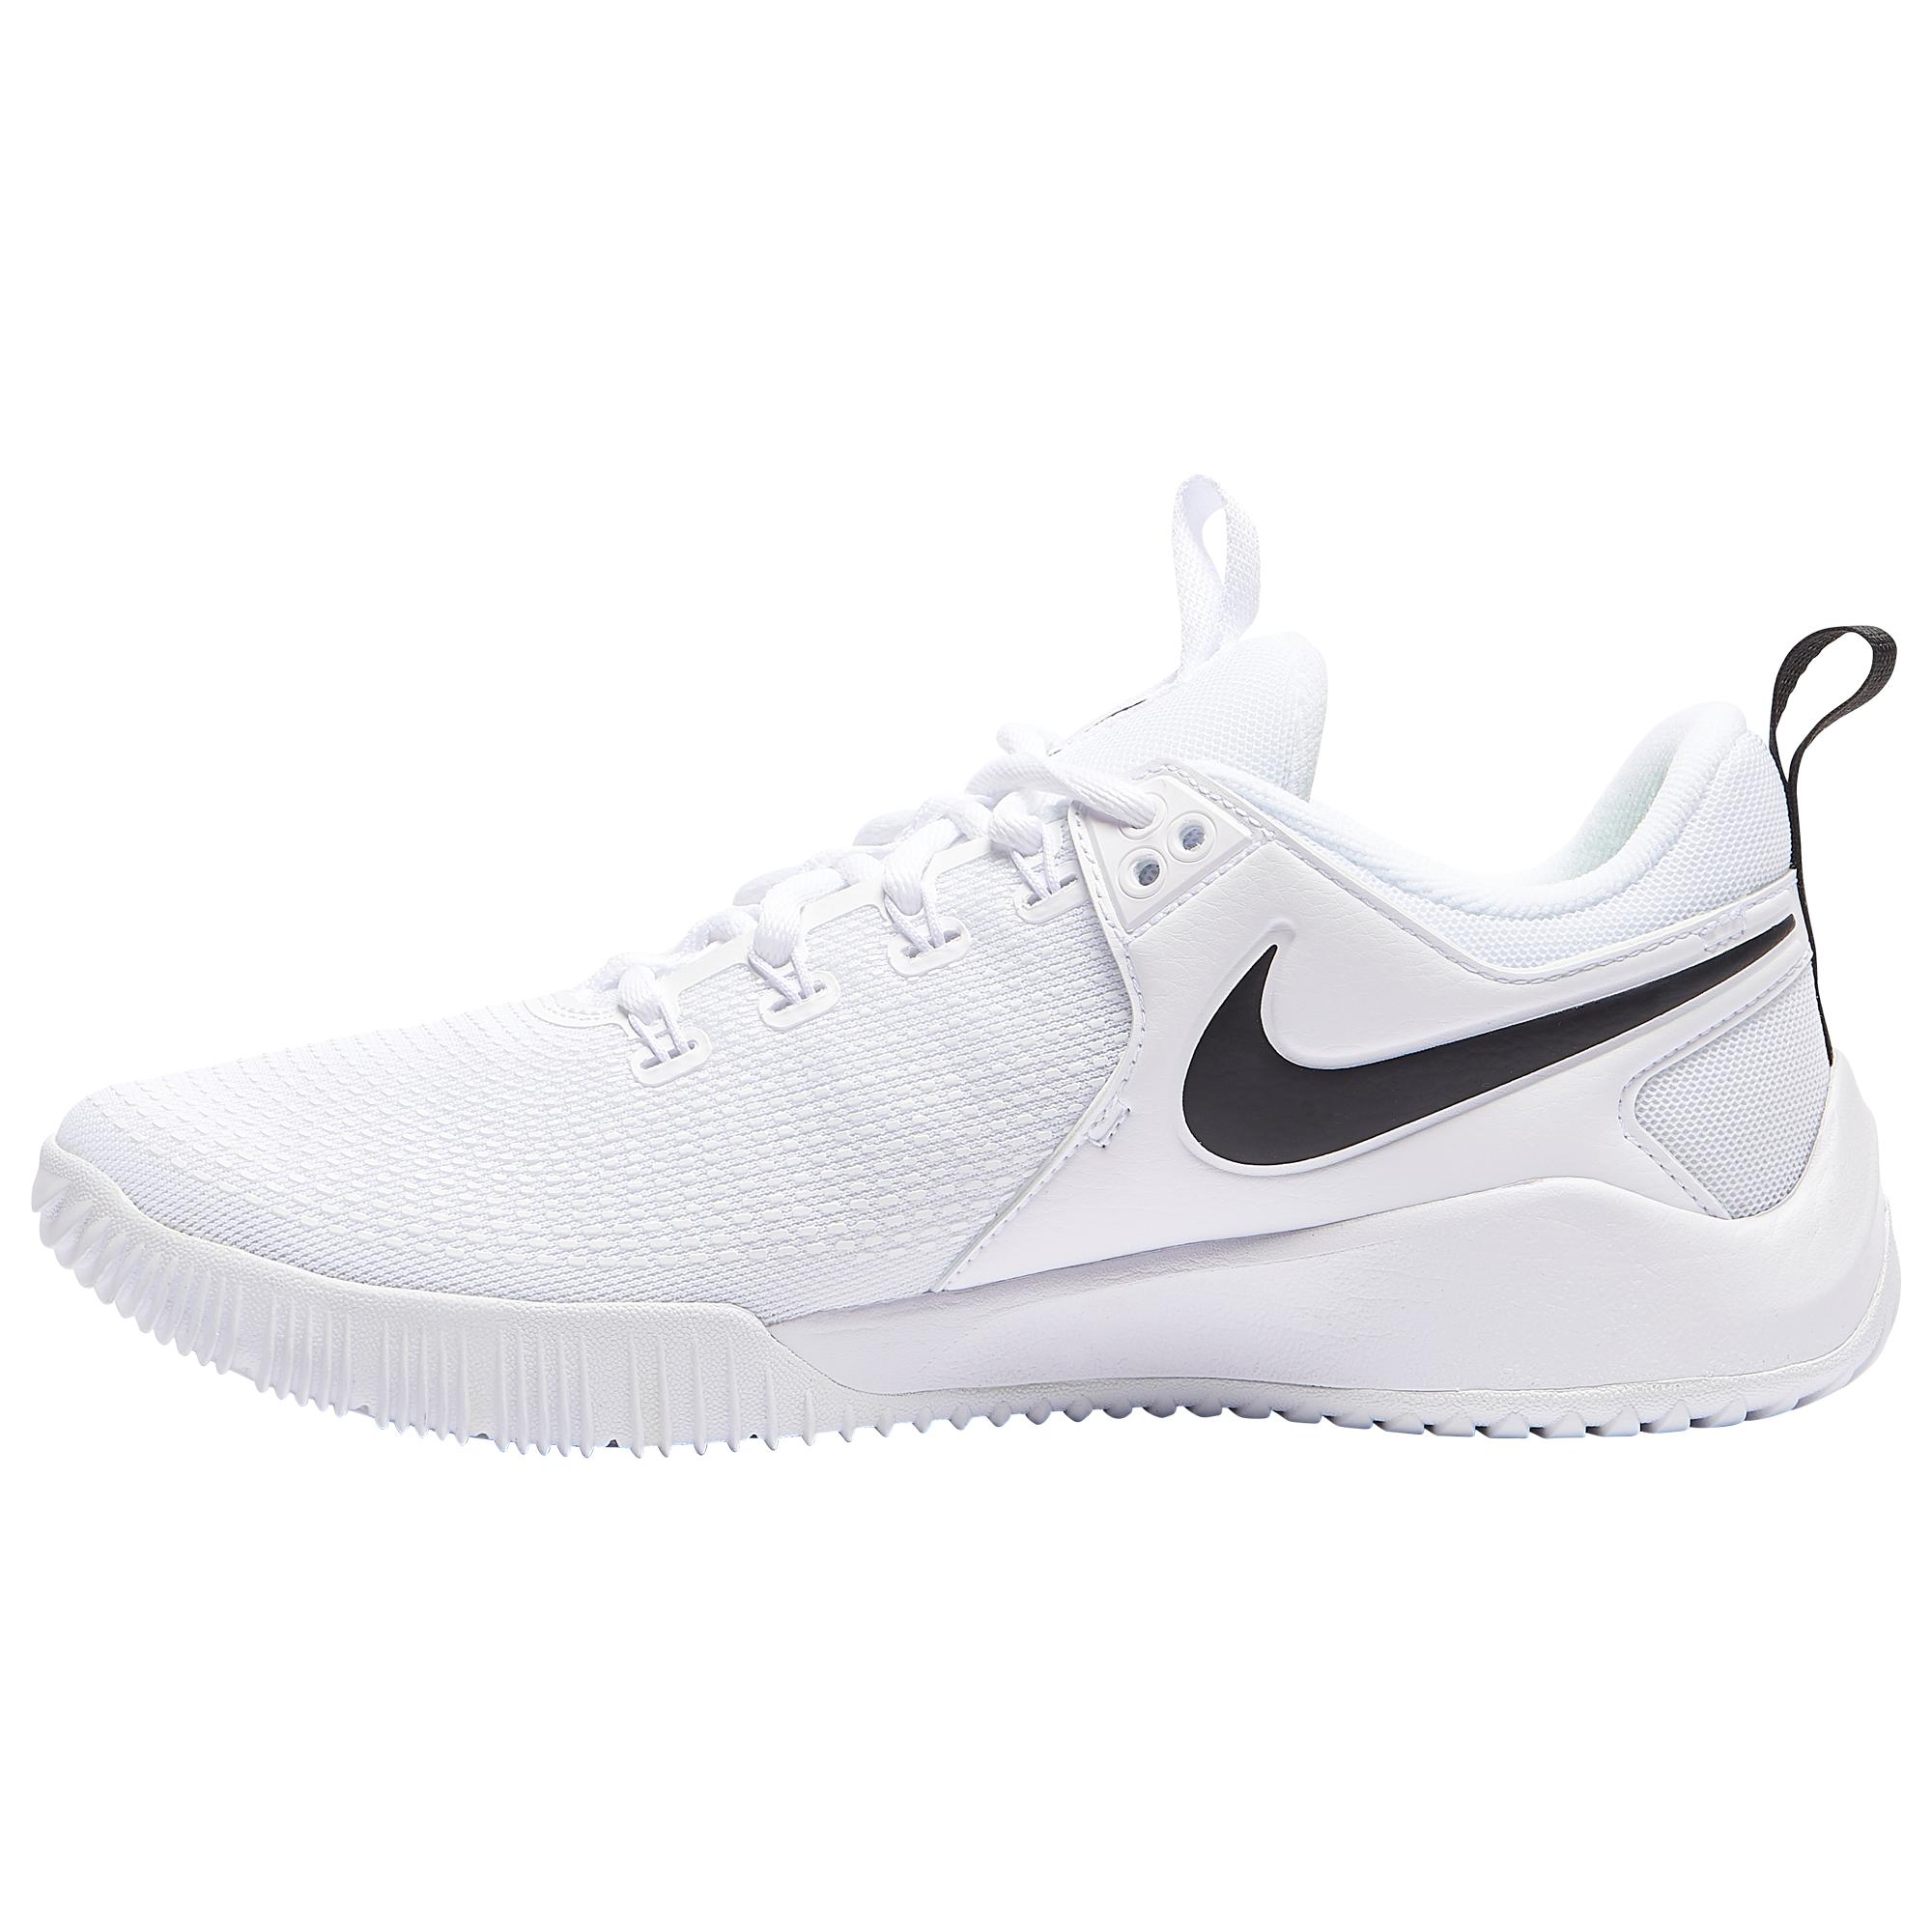 Nike Rubber Zoom Hyperace 2 - Volleyball Shoes in White,Black (White) -  Save 25% | Lyst